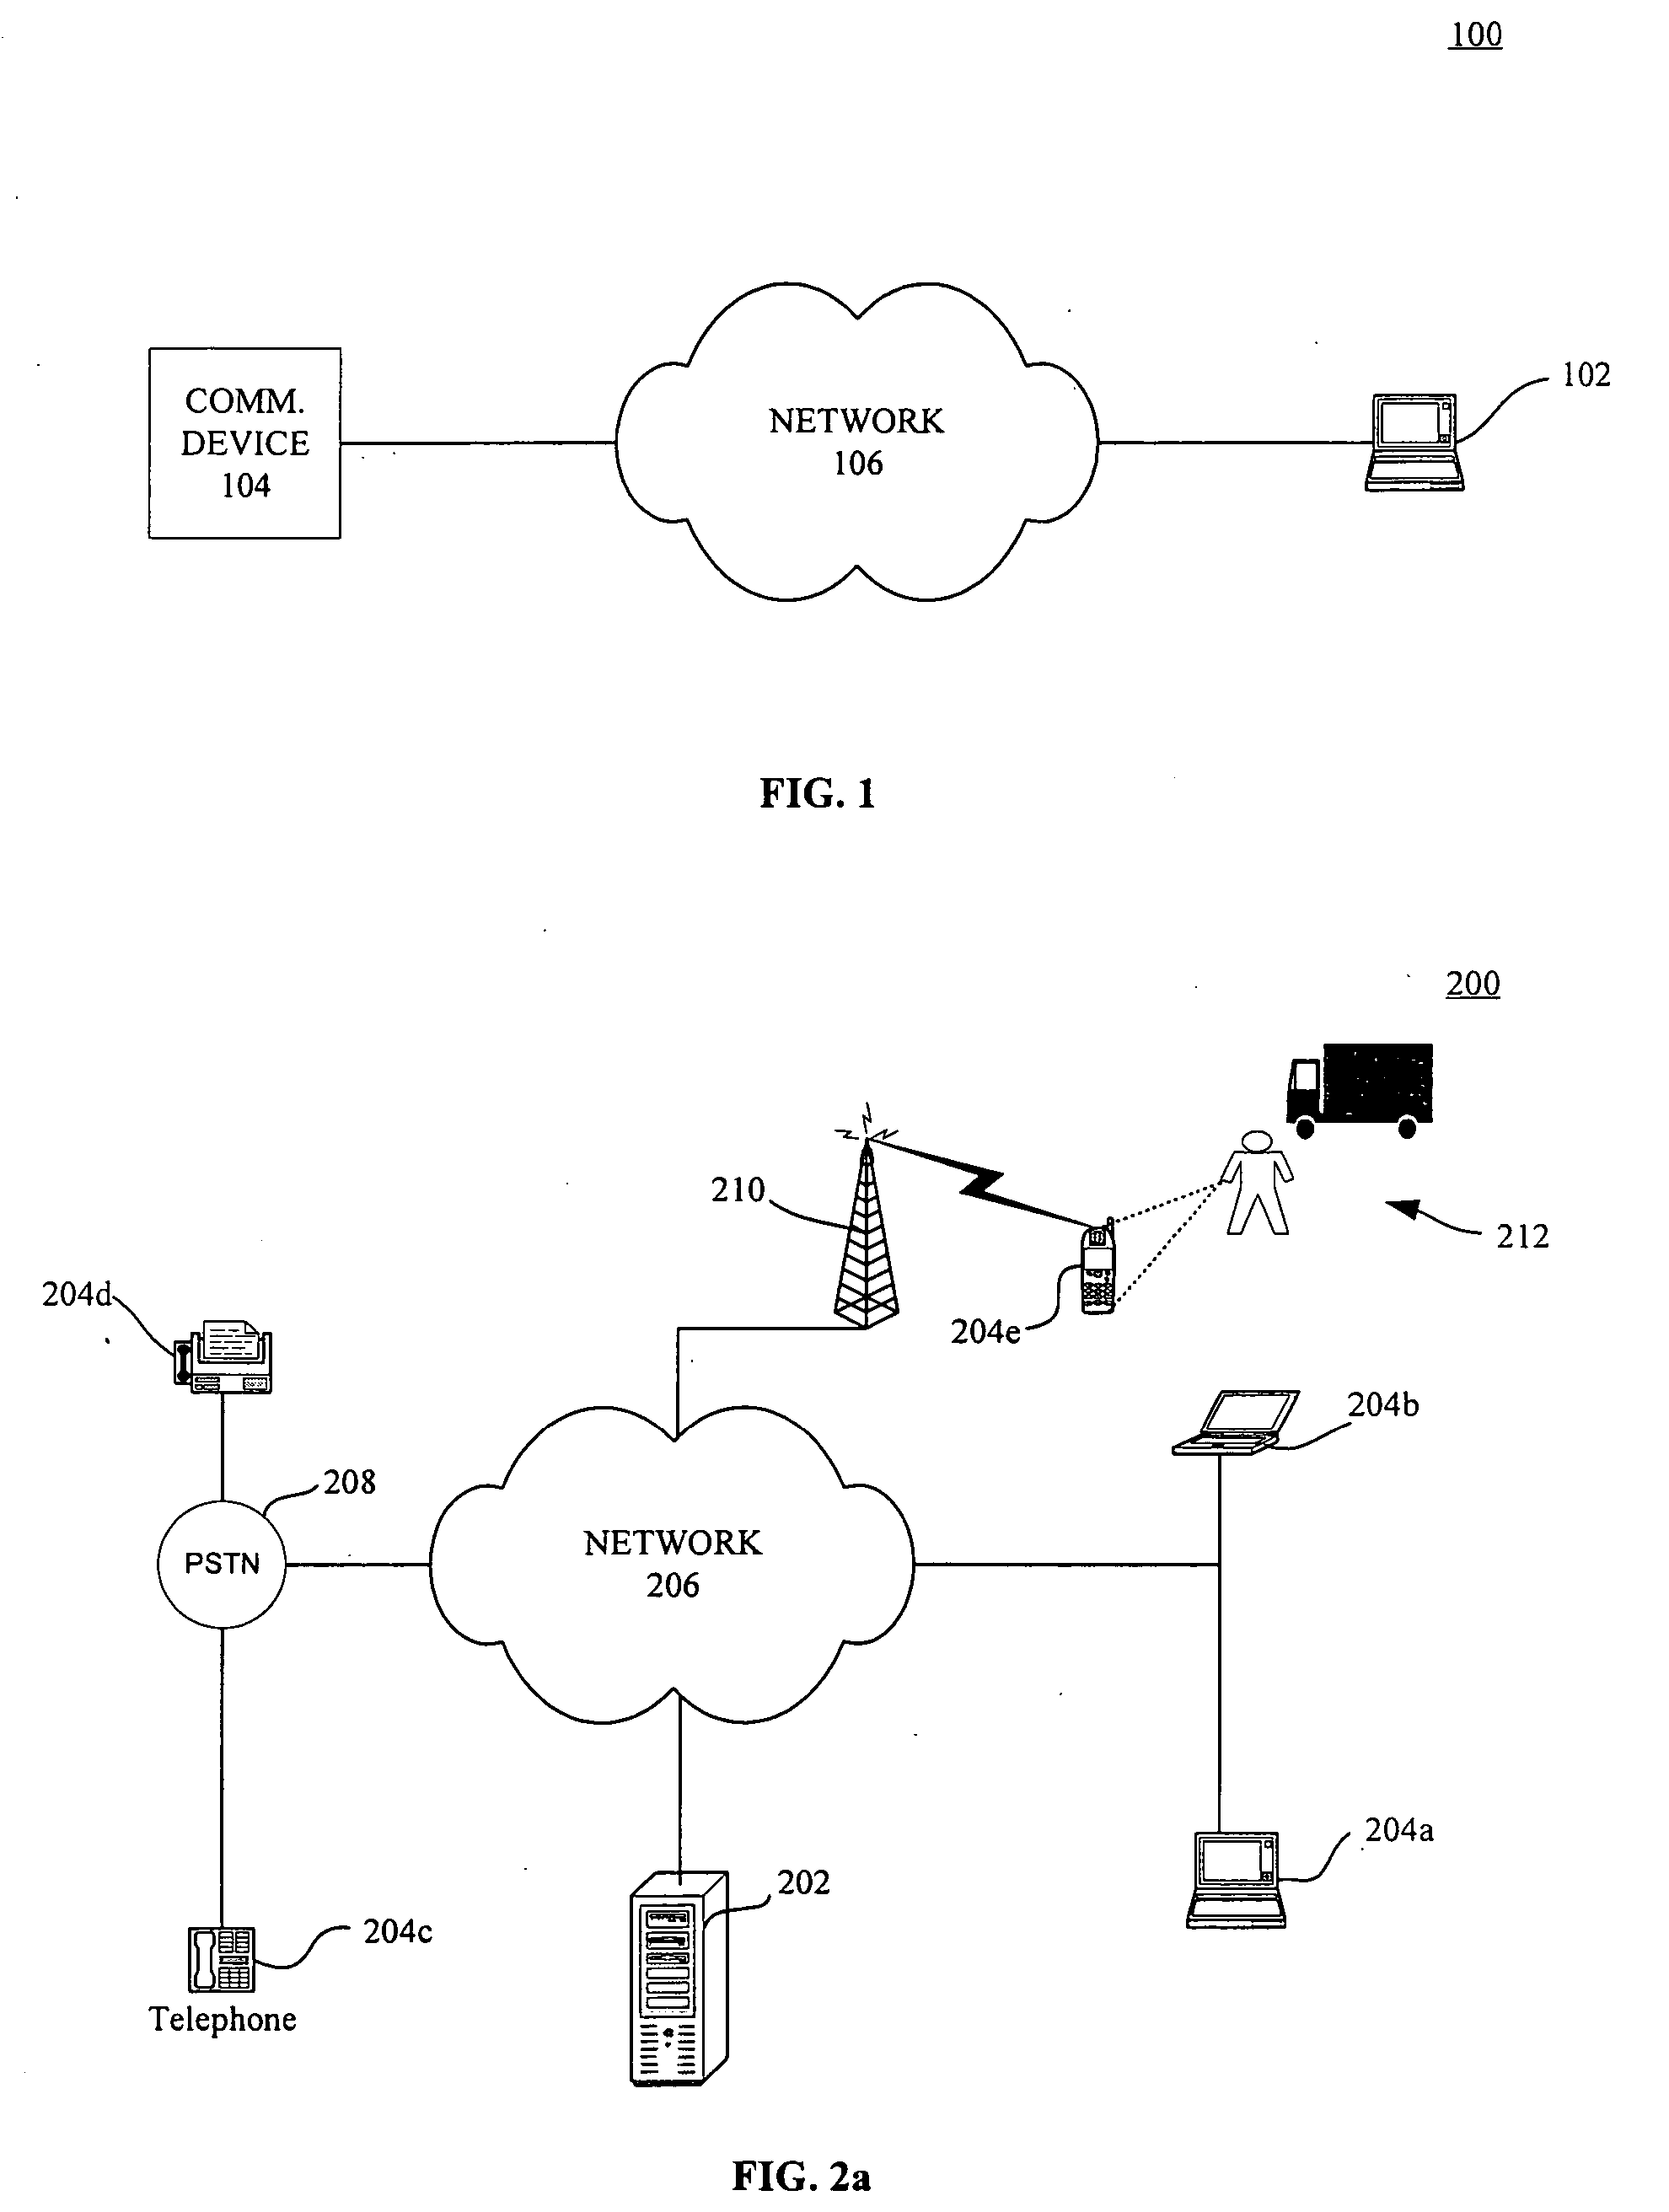 Systems, device, and methods for efficient vegetation maintenance at multiple infrastructure sites